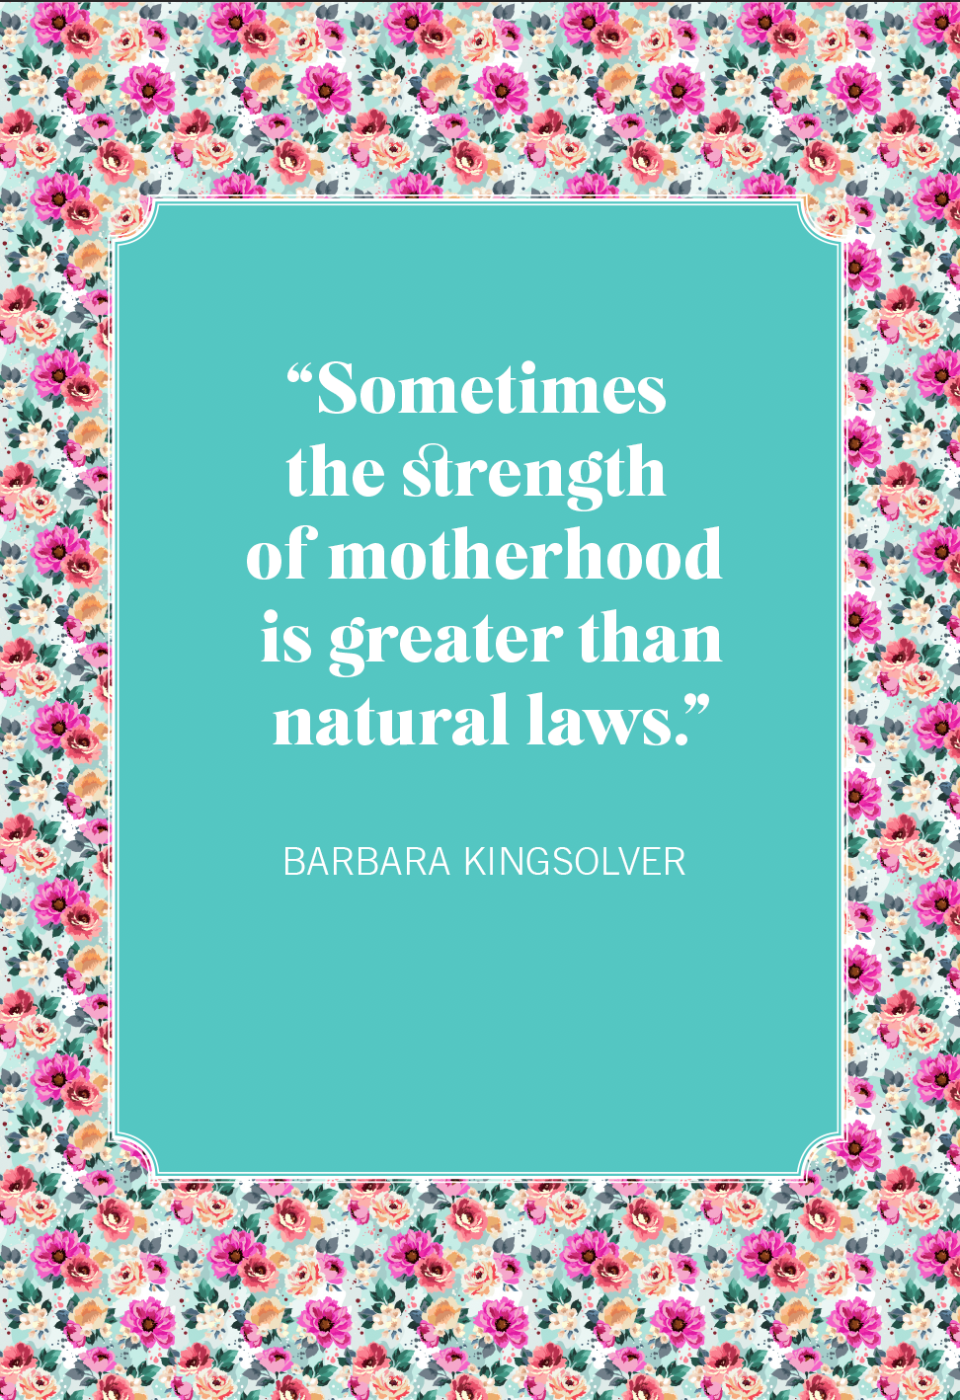 barbara kingsolver mothers day quotes